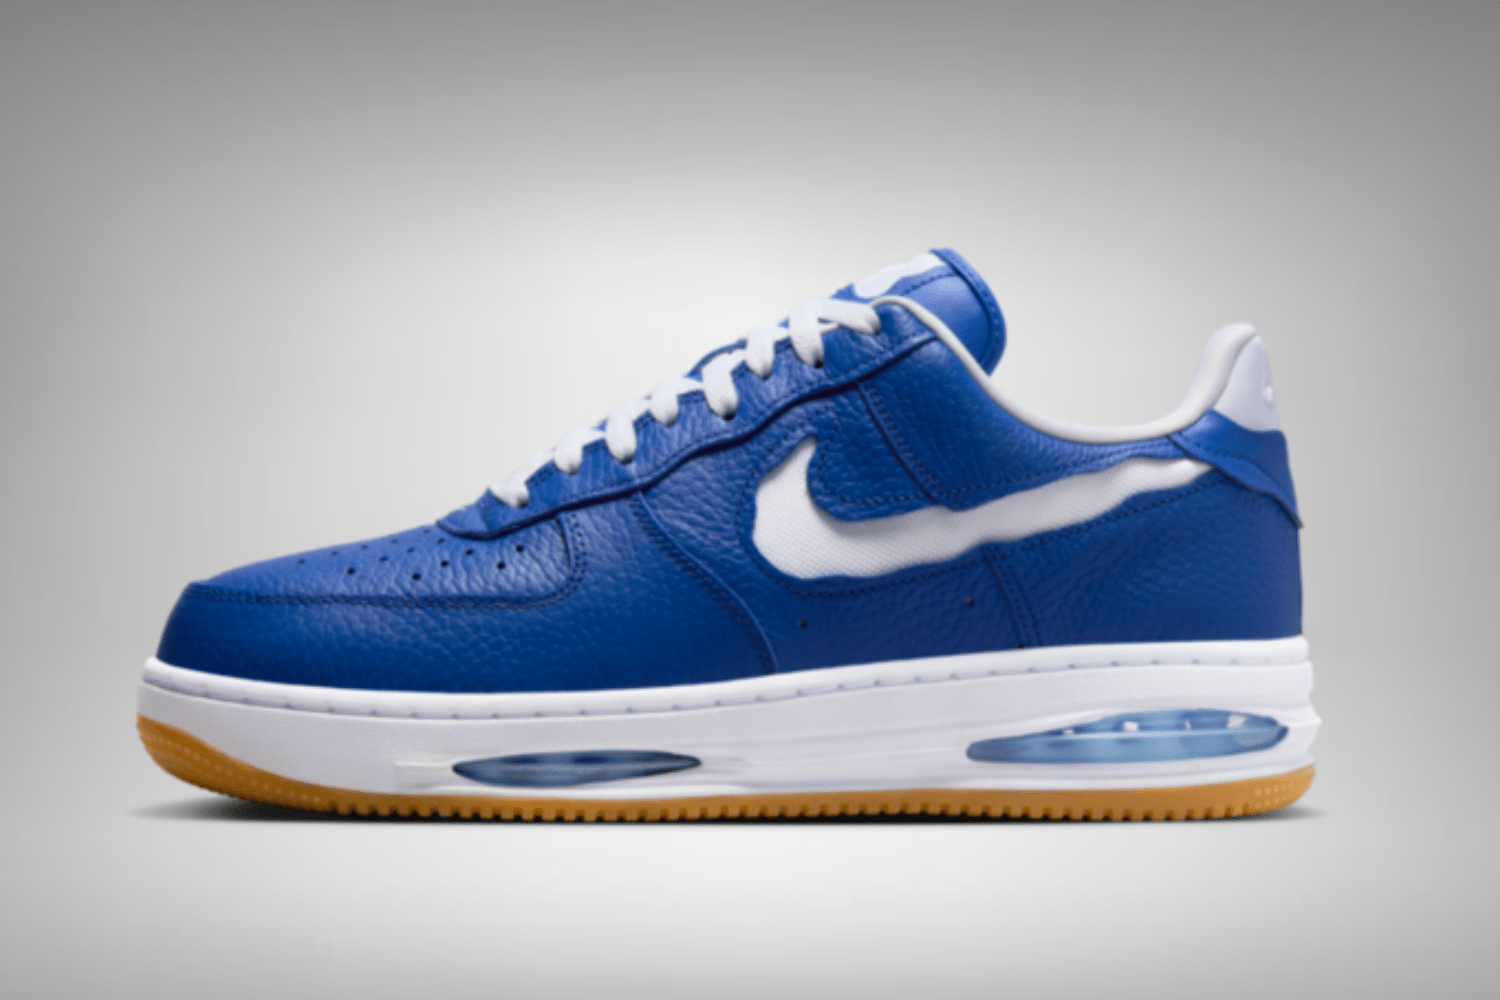 Nike Air Force 1 Low Evo returns with a 'Team Royal' look